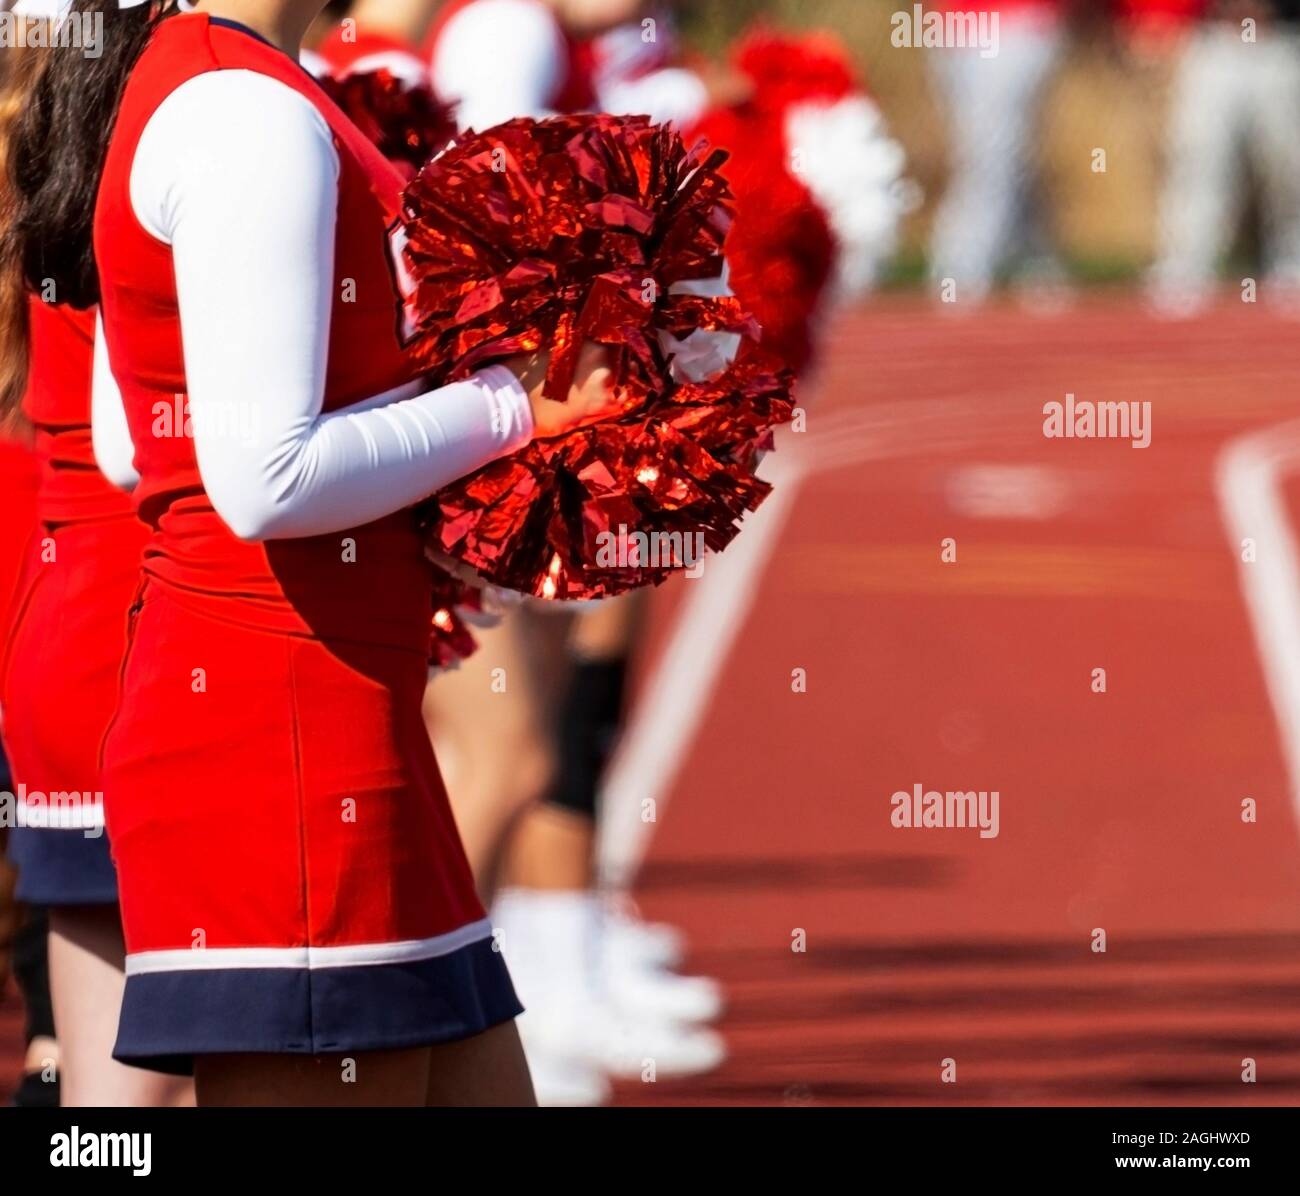 Sunlight reflects off of the red pom poms that cheerleaders are holding while standing on a track watching a high school football game. Stock Photo